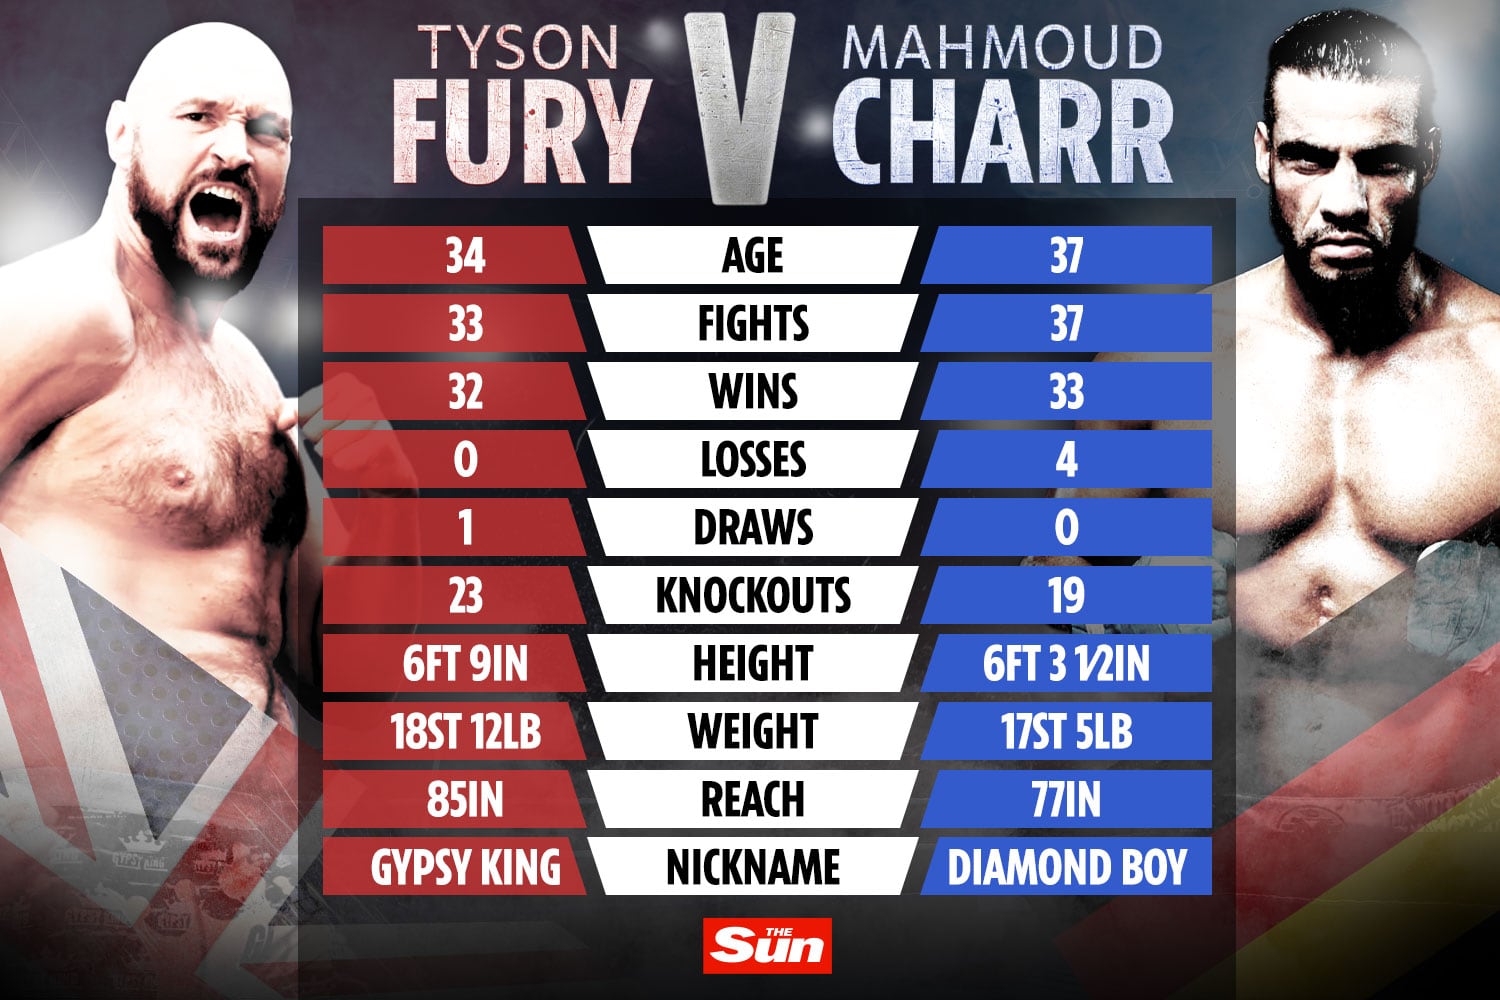 , I survived an assassination attempt after being shot, I’m not afraid of Tyson Fury and will KO him, says Mahmoud Charr